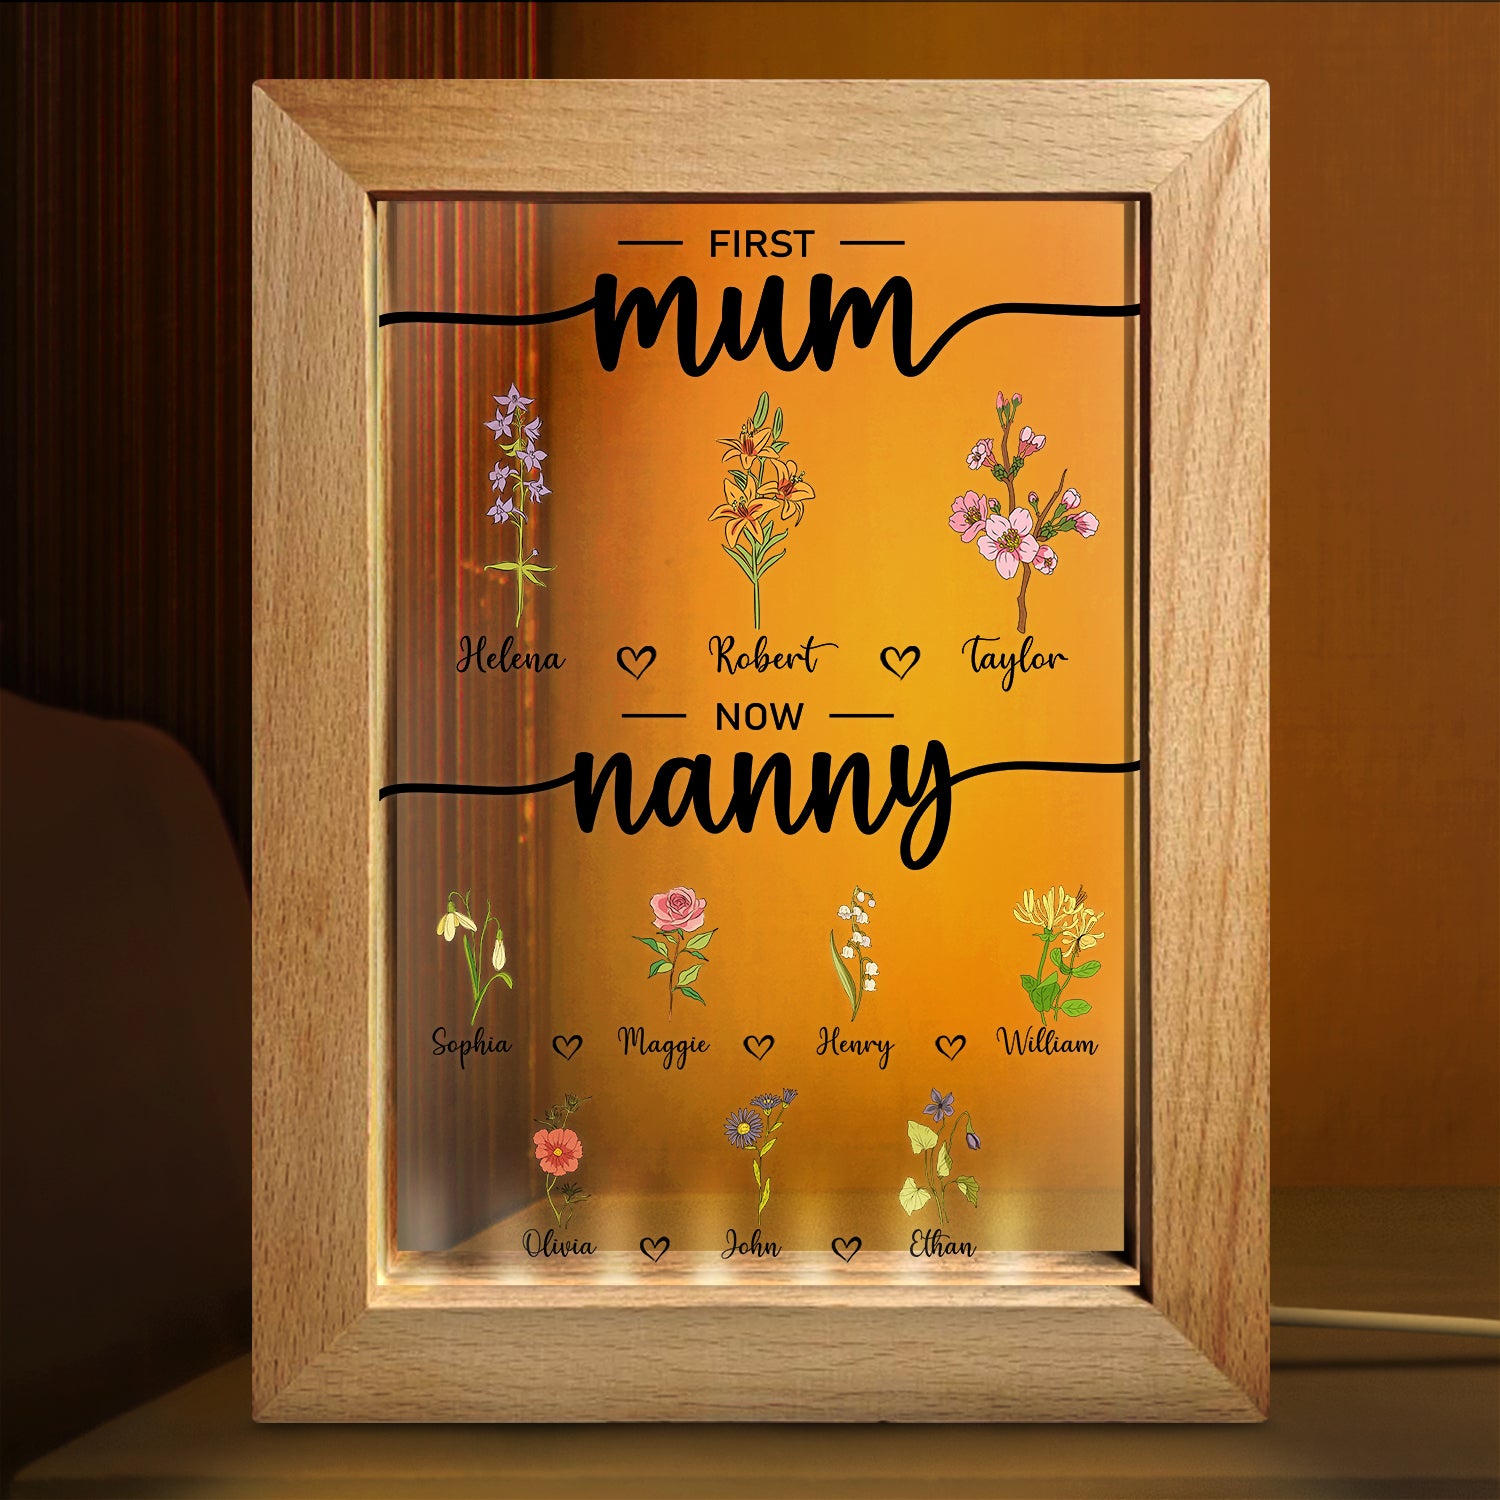 First Mama Now Nanny Flowers - Gift For Grandma, Nana, Granny - Personalized Frame Lamp